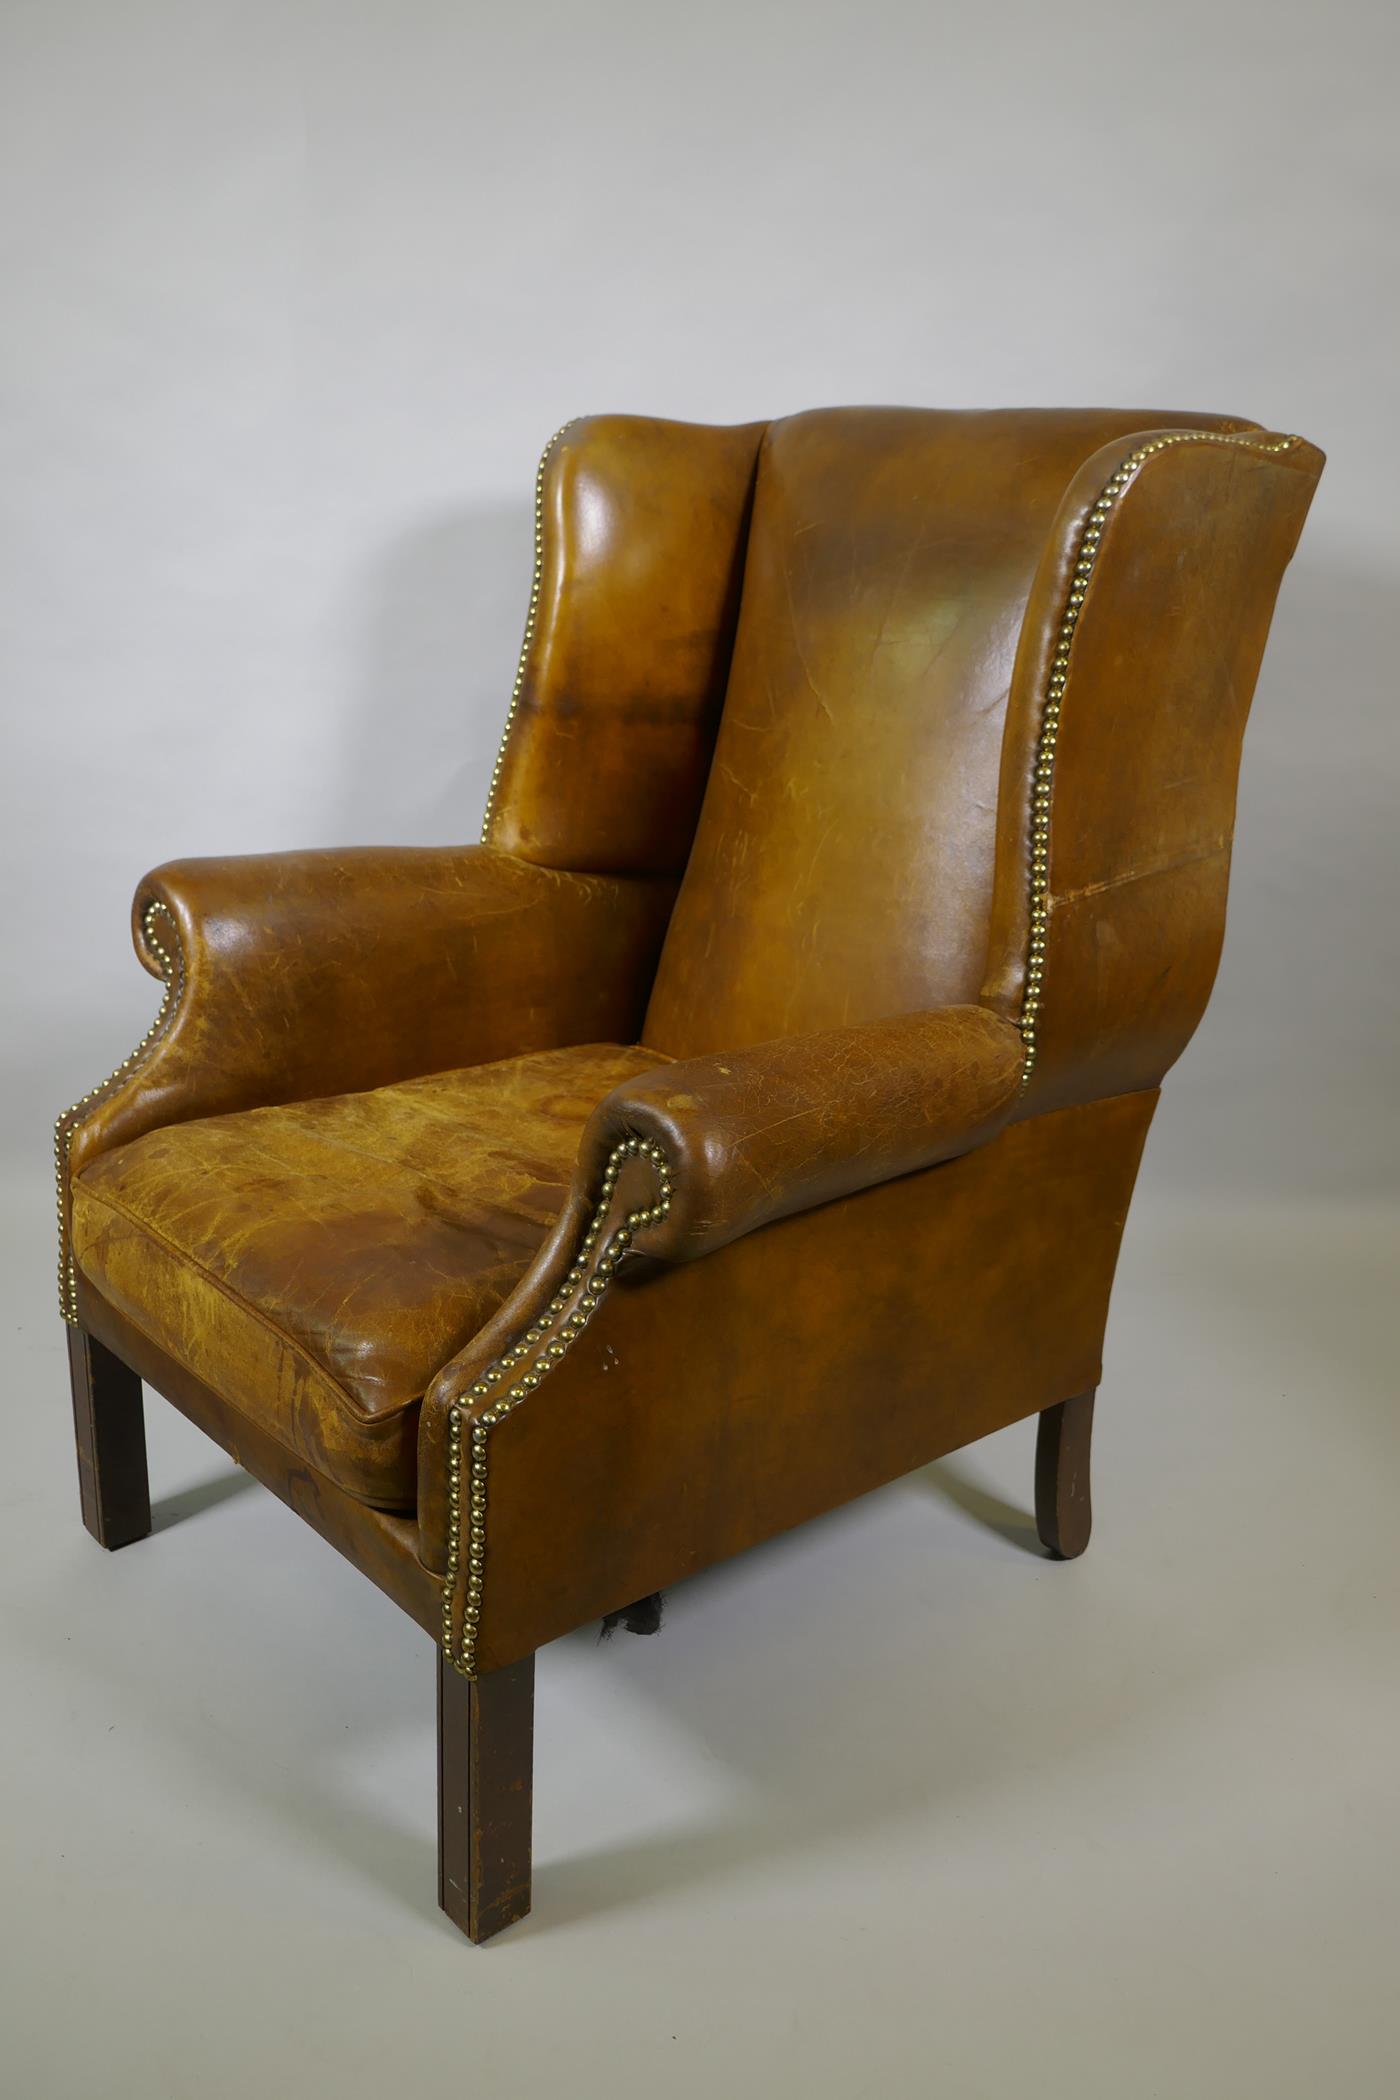 A leather wingback armchair